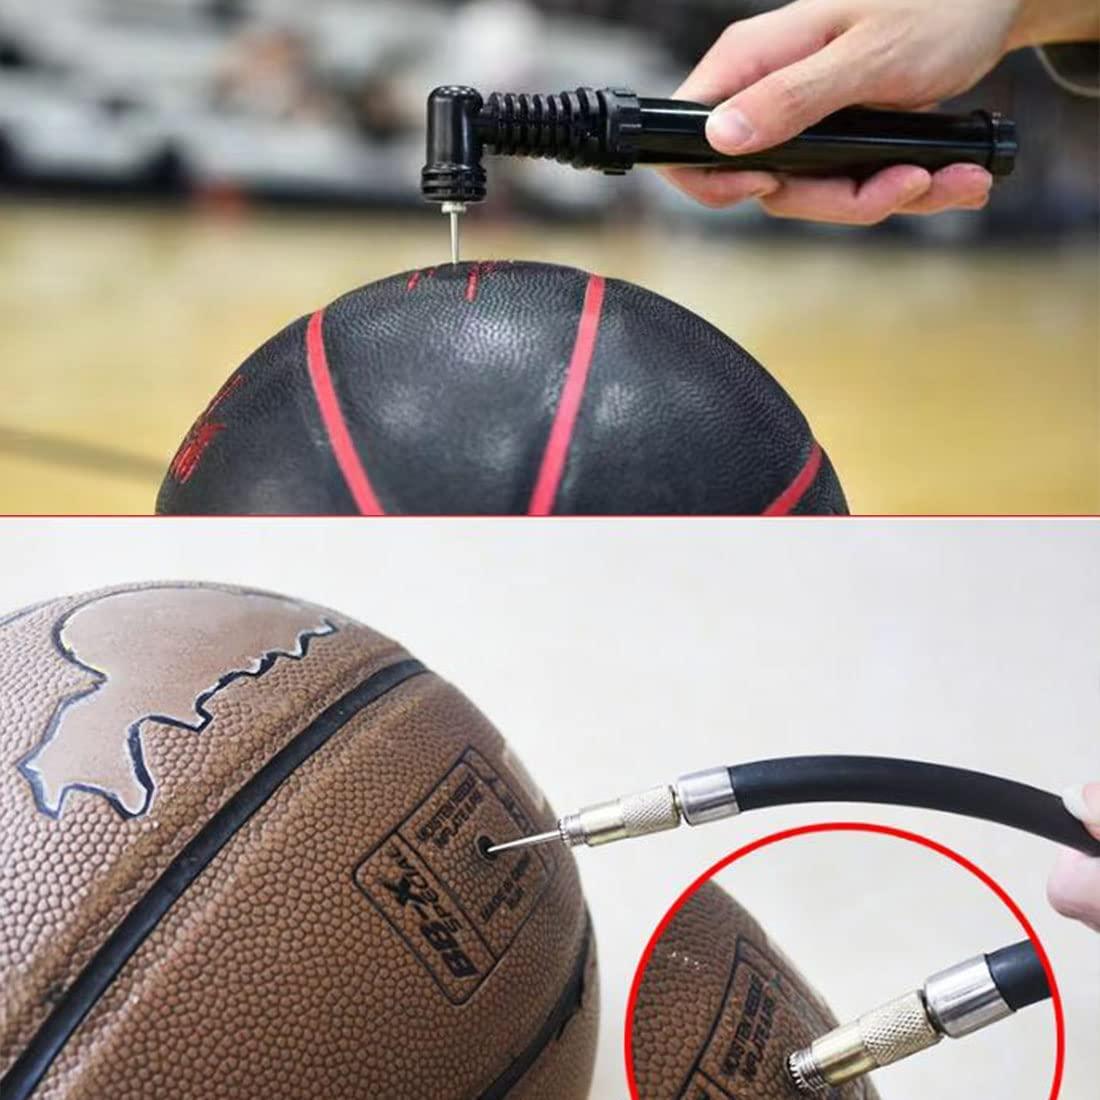 How to Inflate a Soccer Ball: Pumping, Maintenance, and More